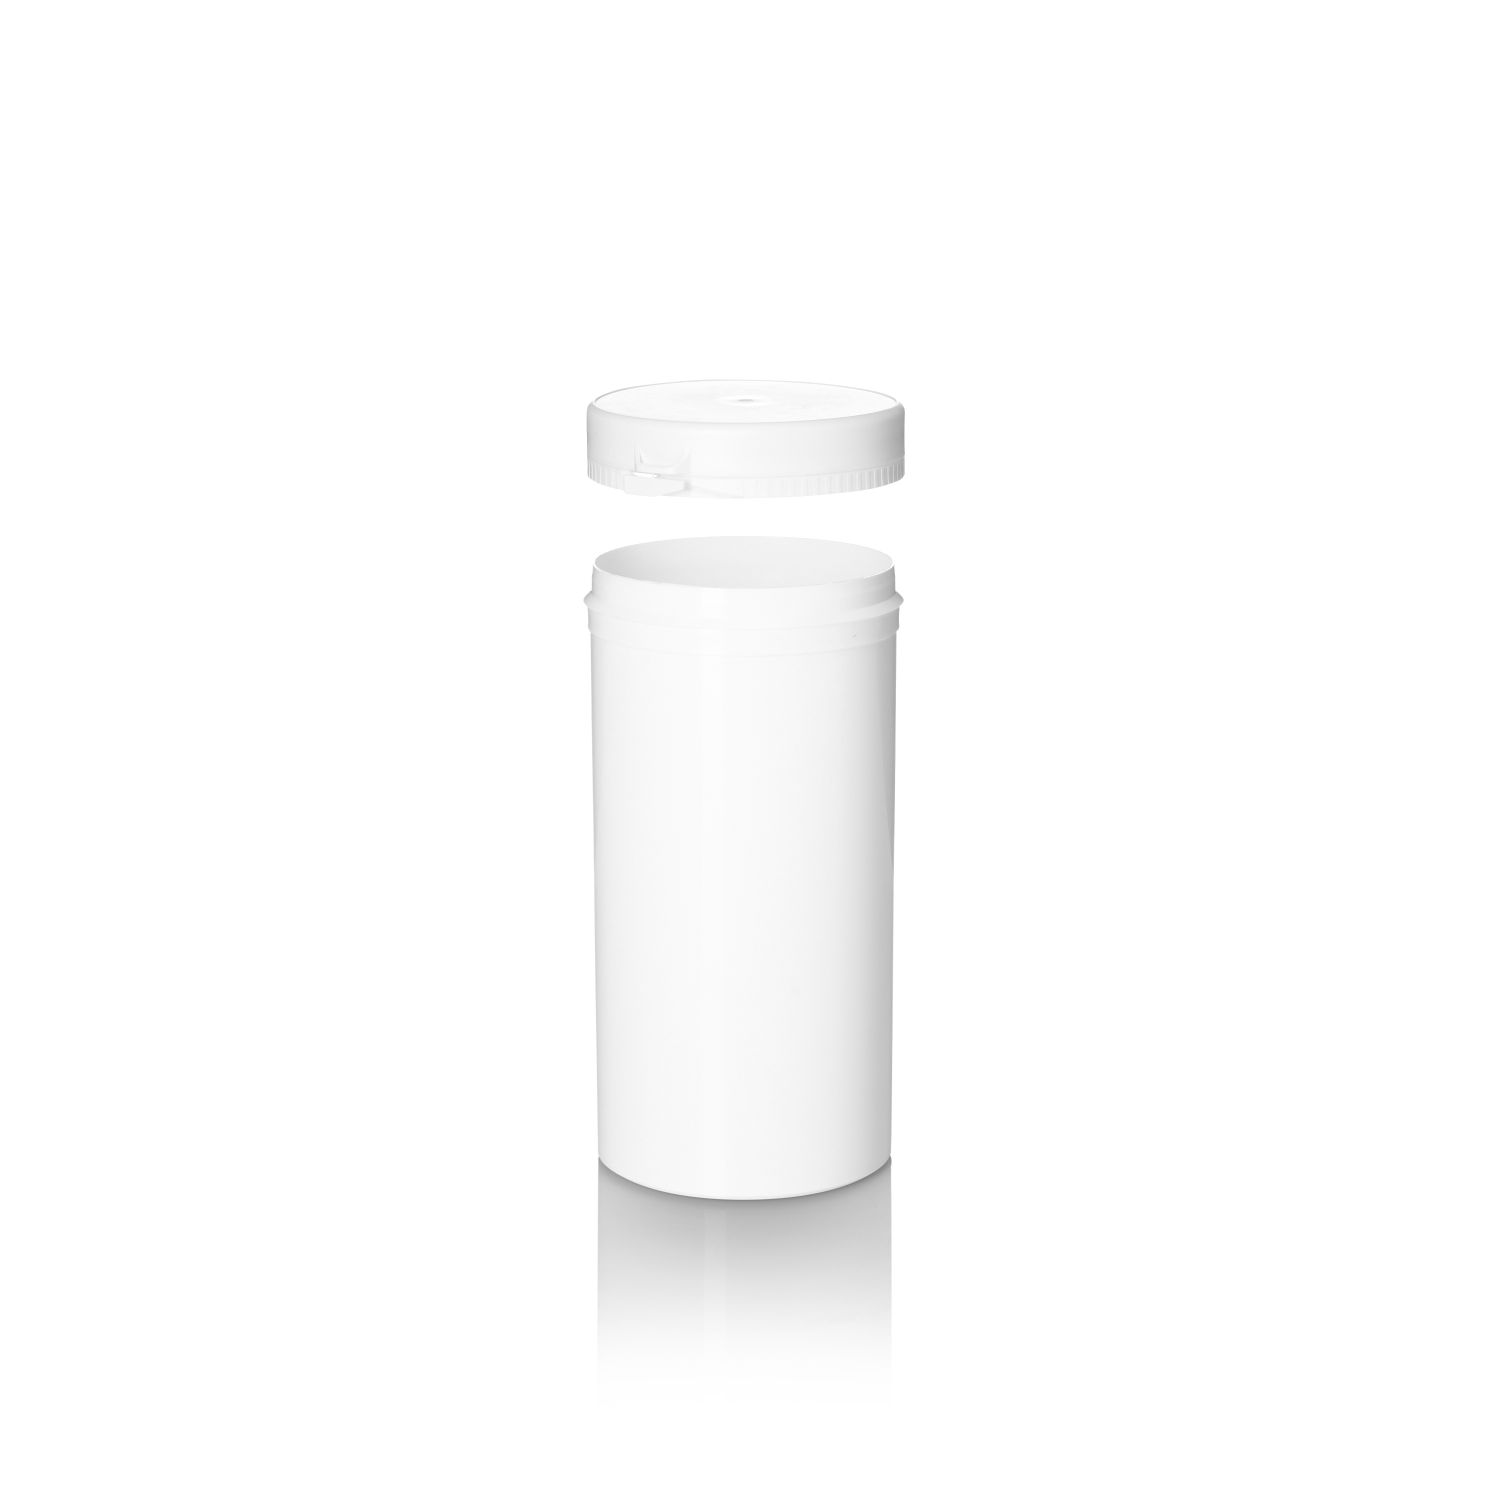 Stockists Of 650ml White PP Tamper Evident Snapsecure Jar